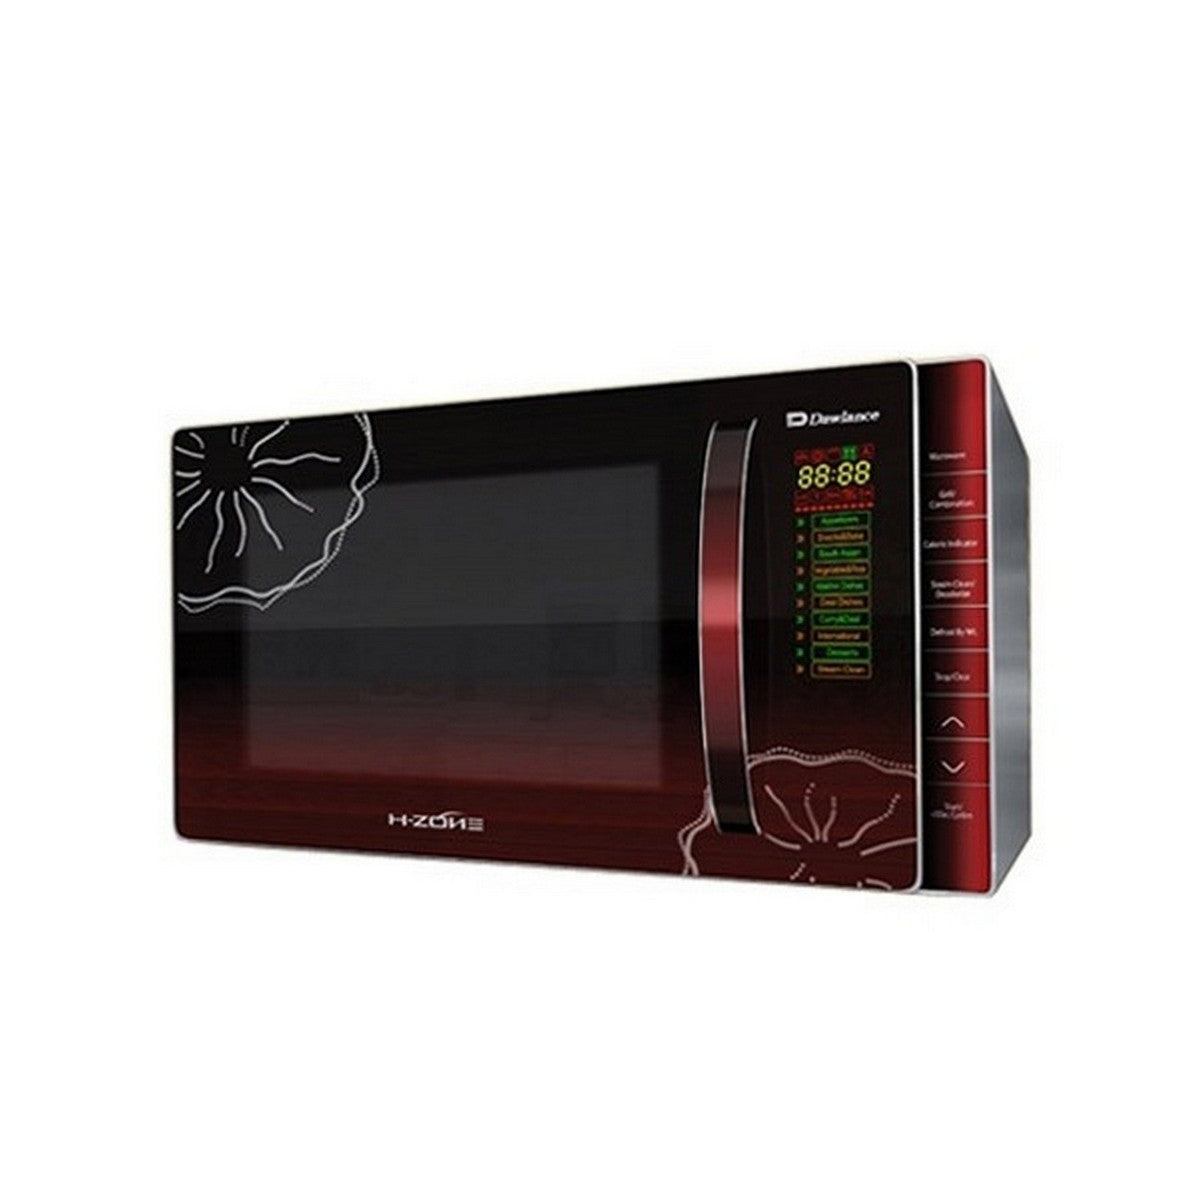 Dawlance Microwave - DW115 CHZP Banking Microwave Oven (Digital, Grill)